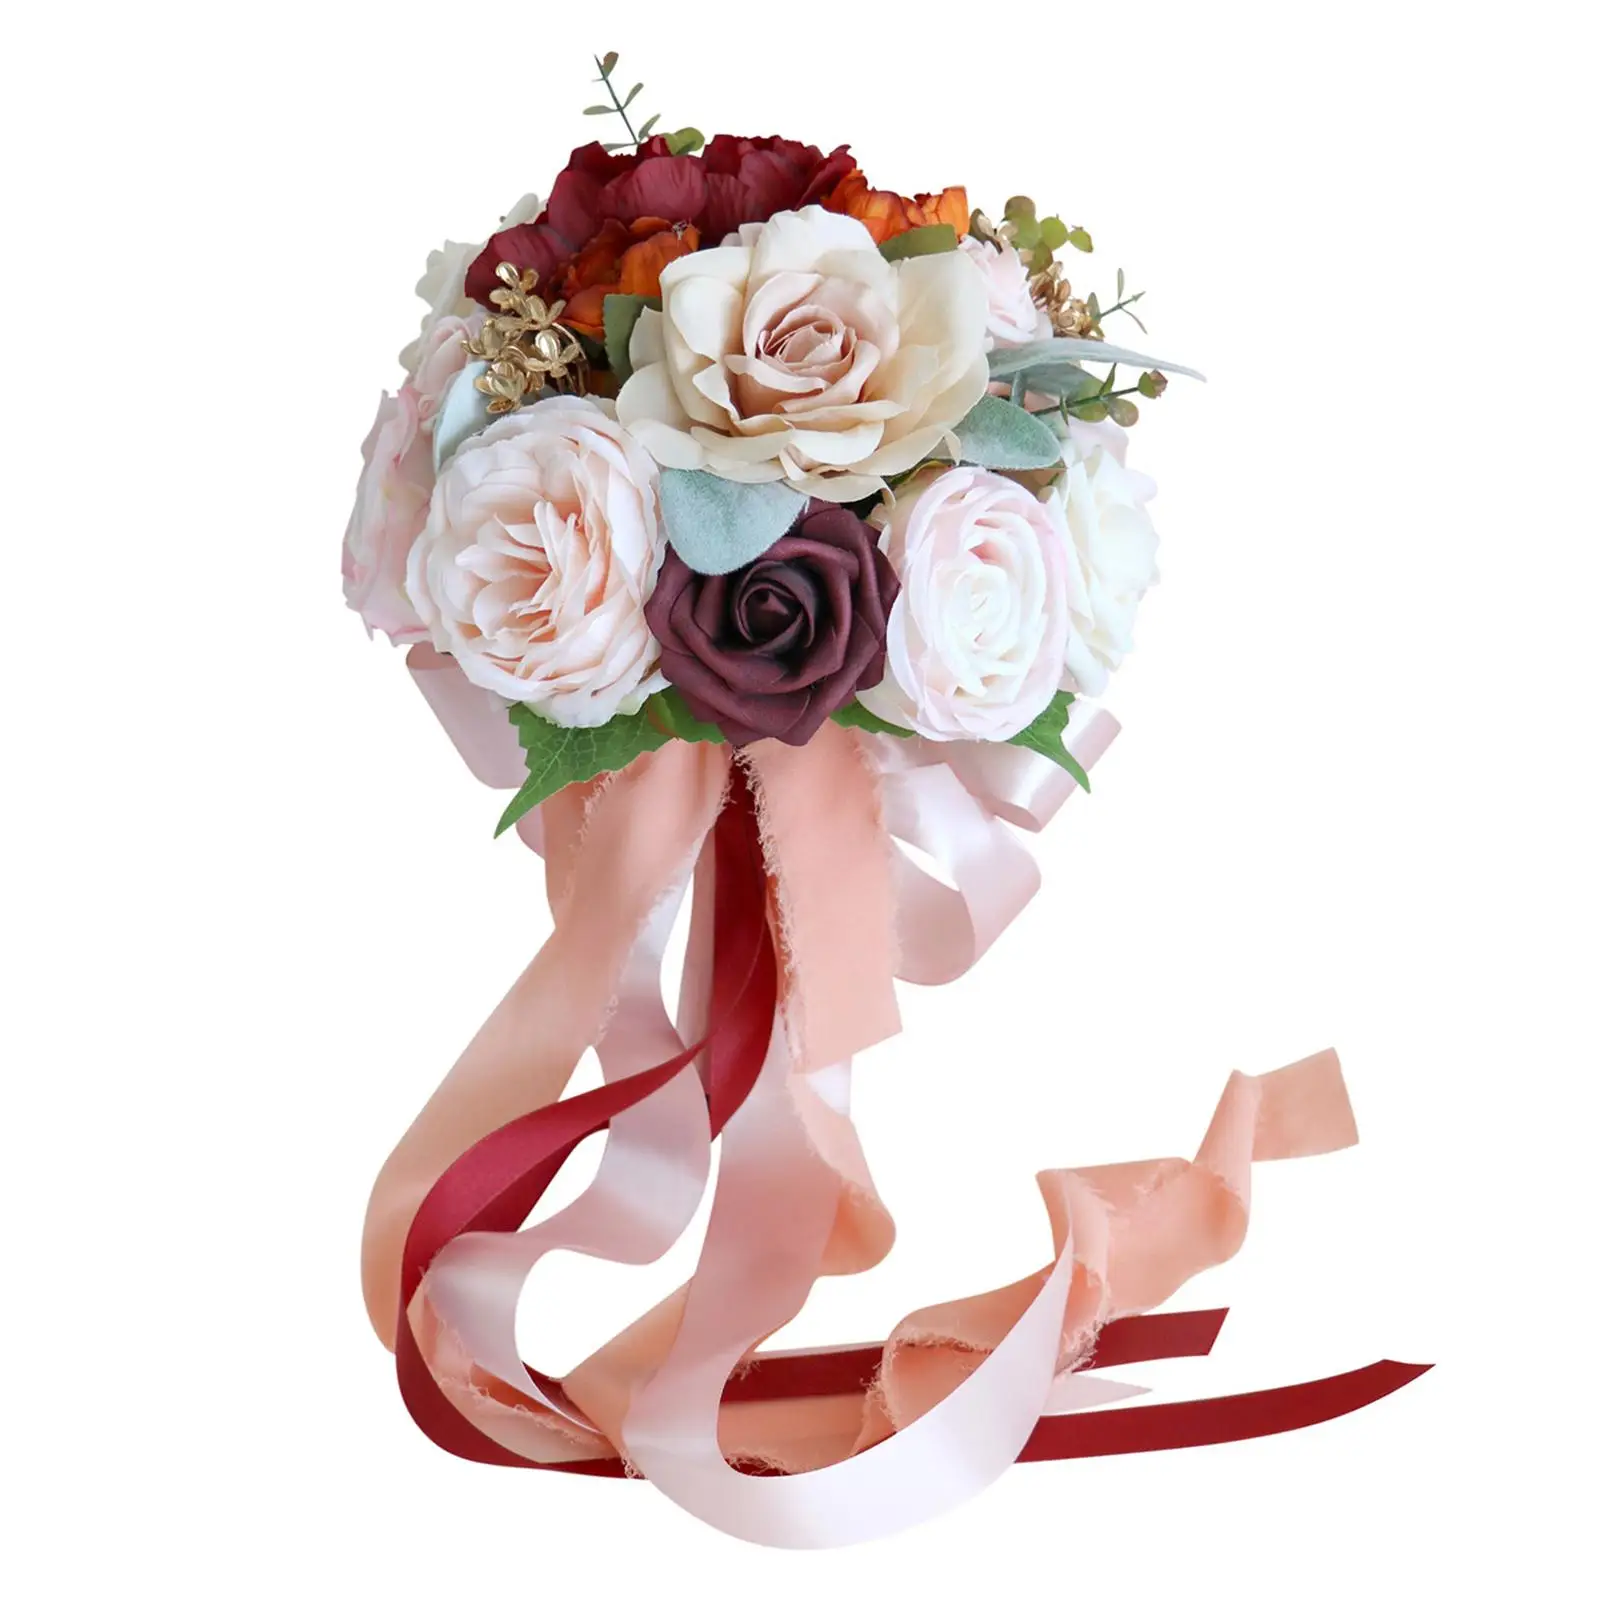 Wedding Bouquet Decoration Fake Handmade Ribbon bouquet Bridal Flowers for Bridesmaid Prom Anniversary Bride Party